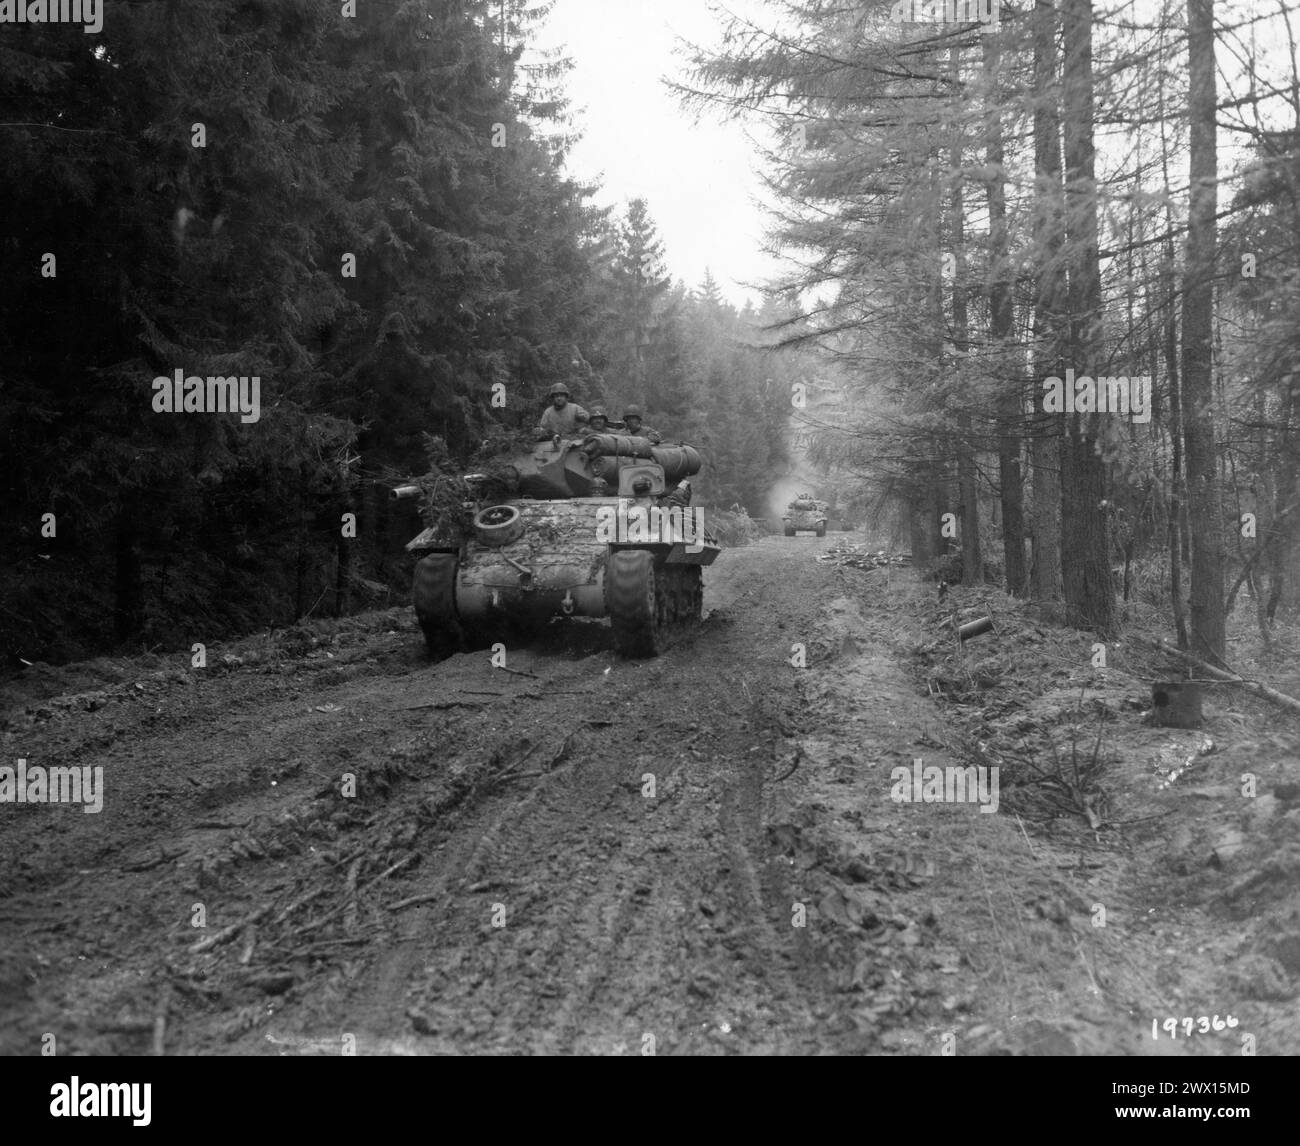 Original Caption: M-10 tank destroyers move up through Hurtgen Forest, on their way to Schmidt, Germany, to encounter a German tank unit occupying that town. 11/4/44. -893rd TD Battalion. Stock Photo